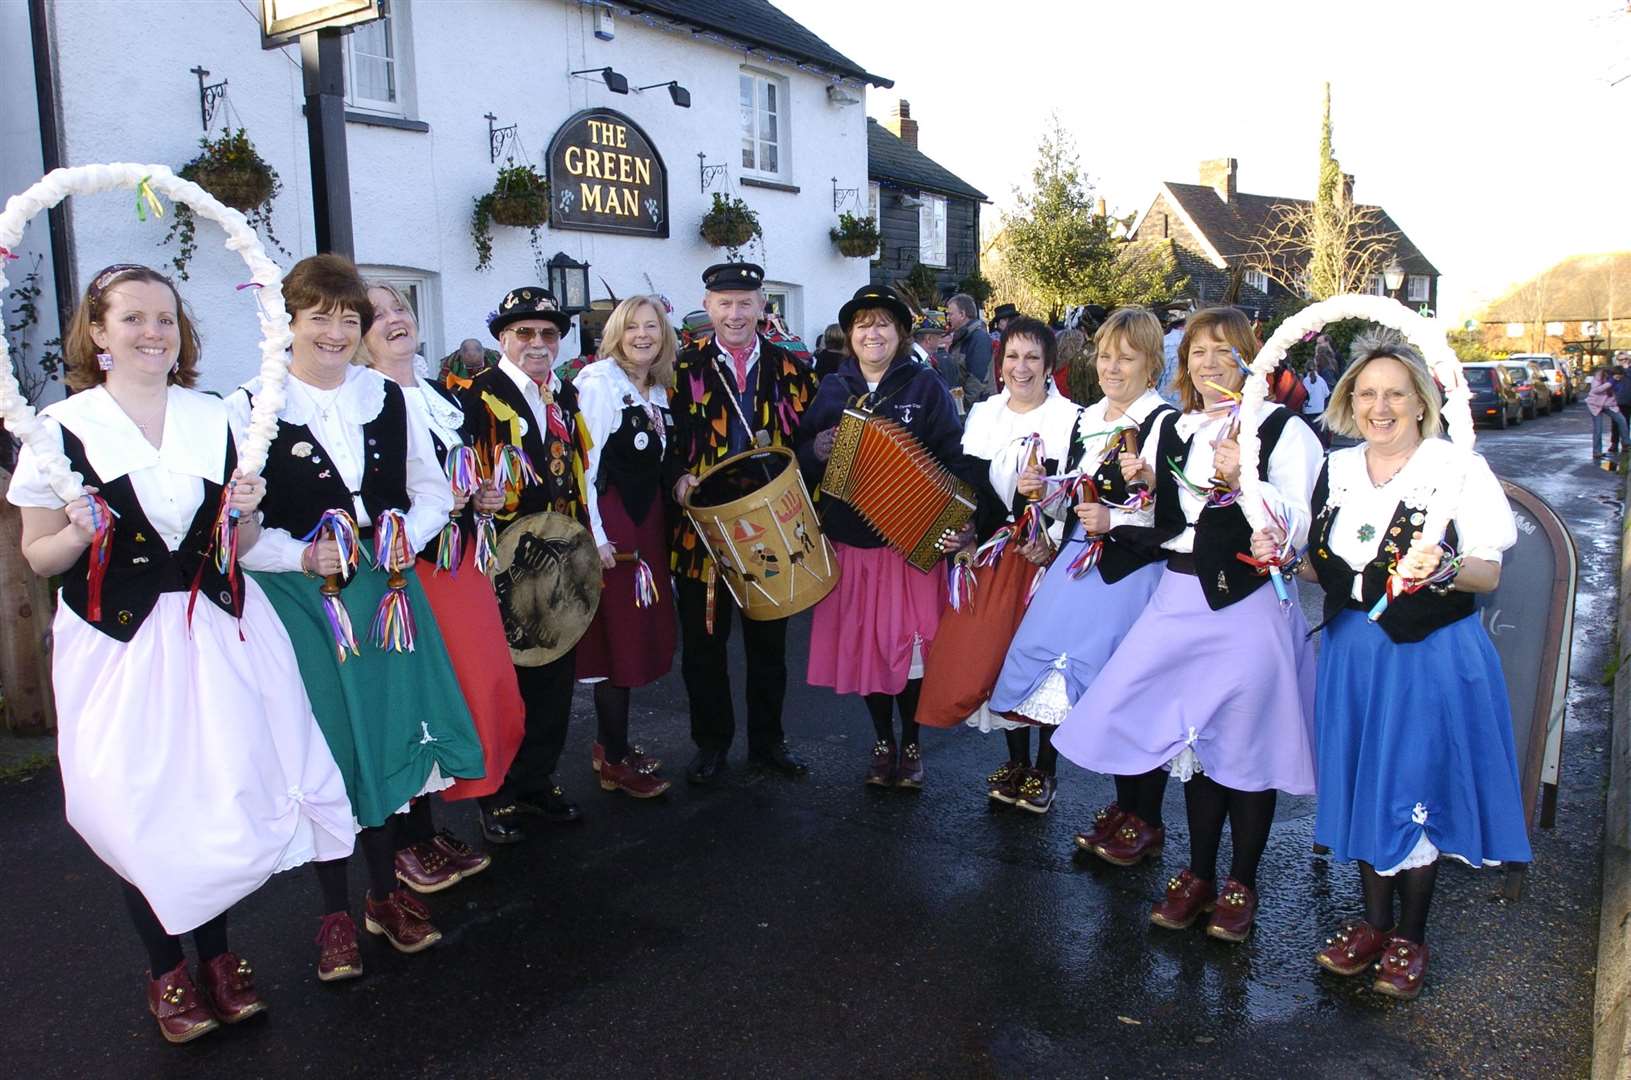 Morris dancing day at the Green Man Pub in Hodsoll Street, Meopham, in January 2007. The pub burnt down in 2021 after being hit by lightning